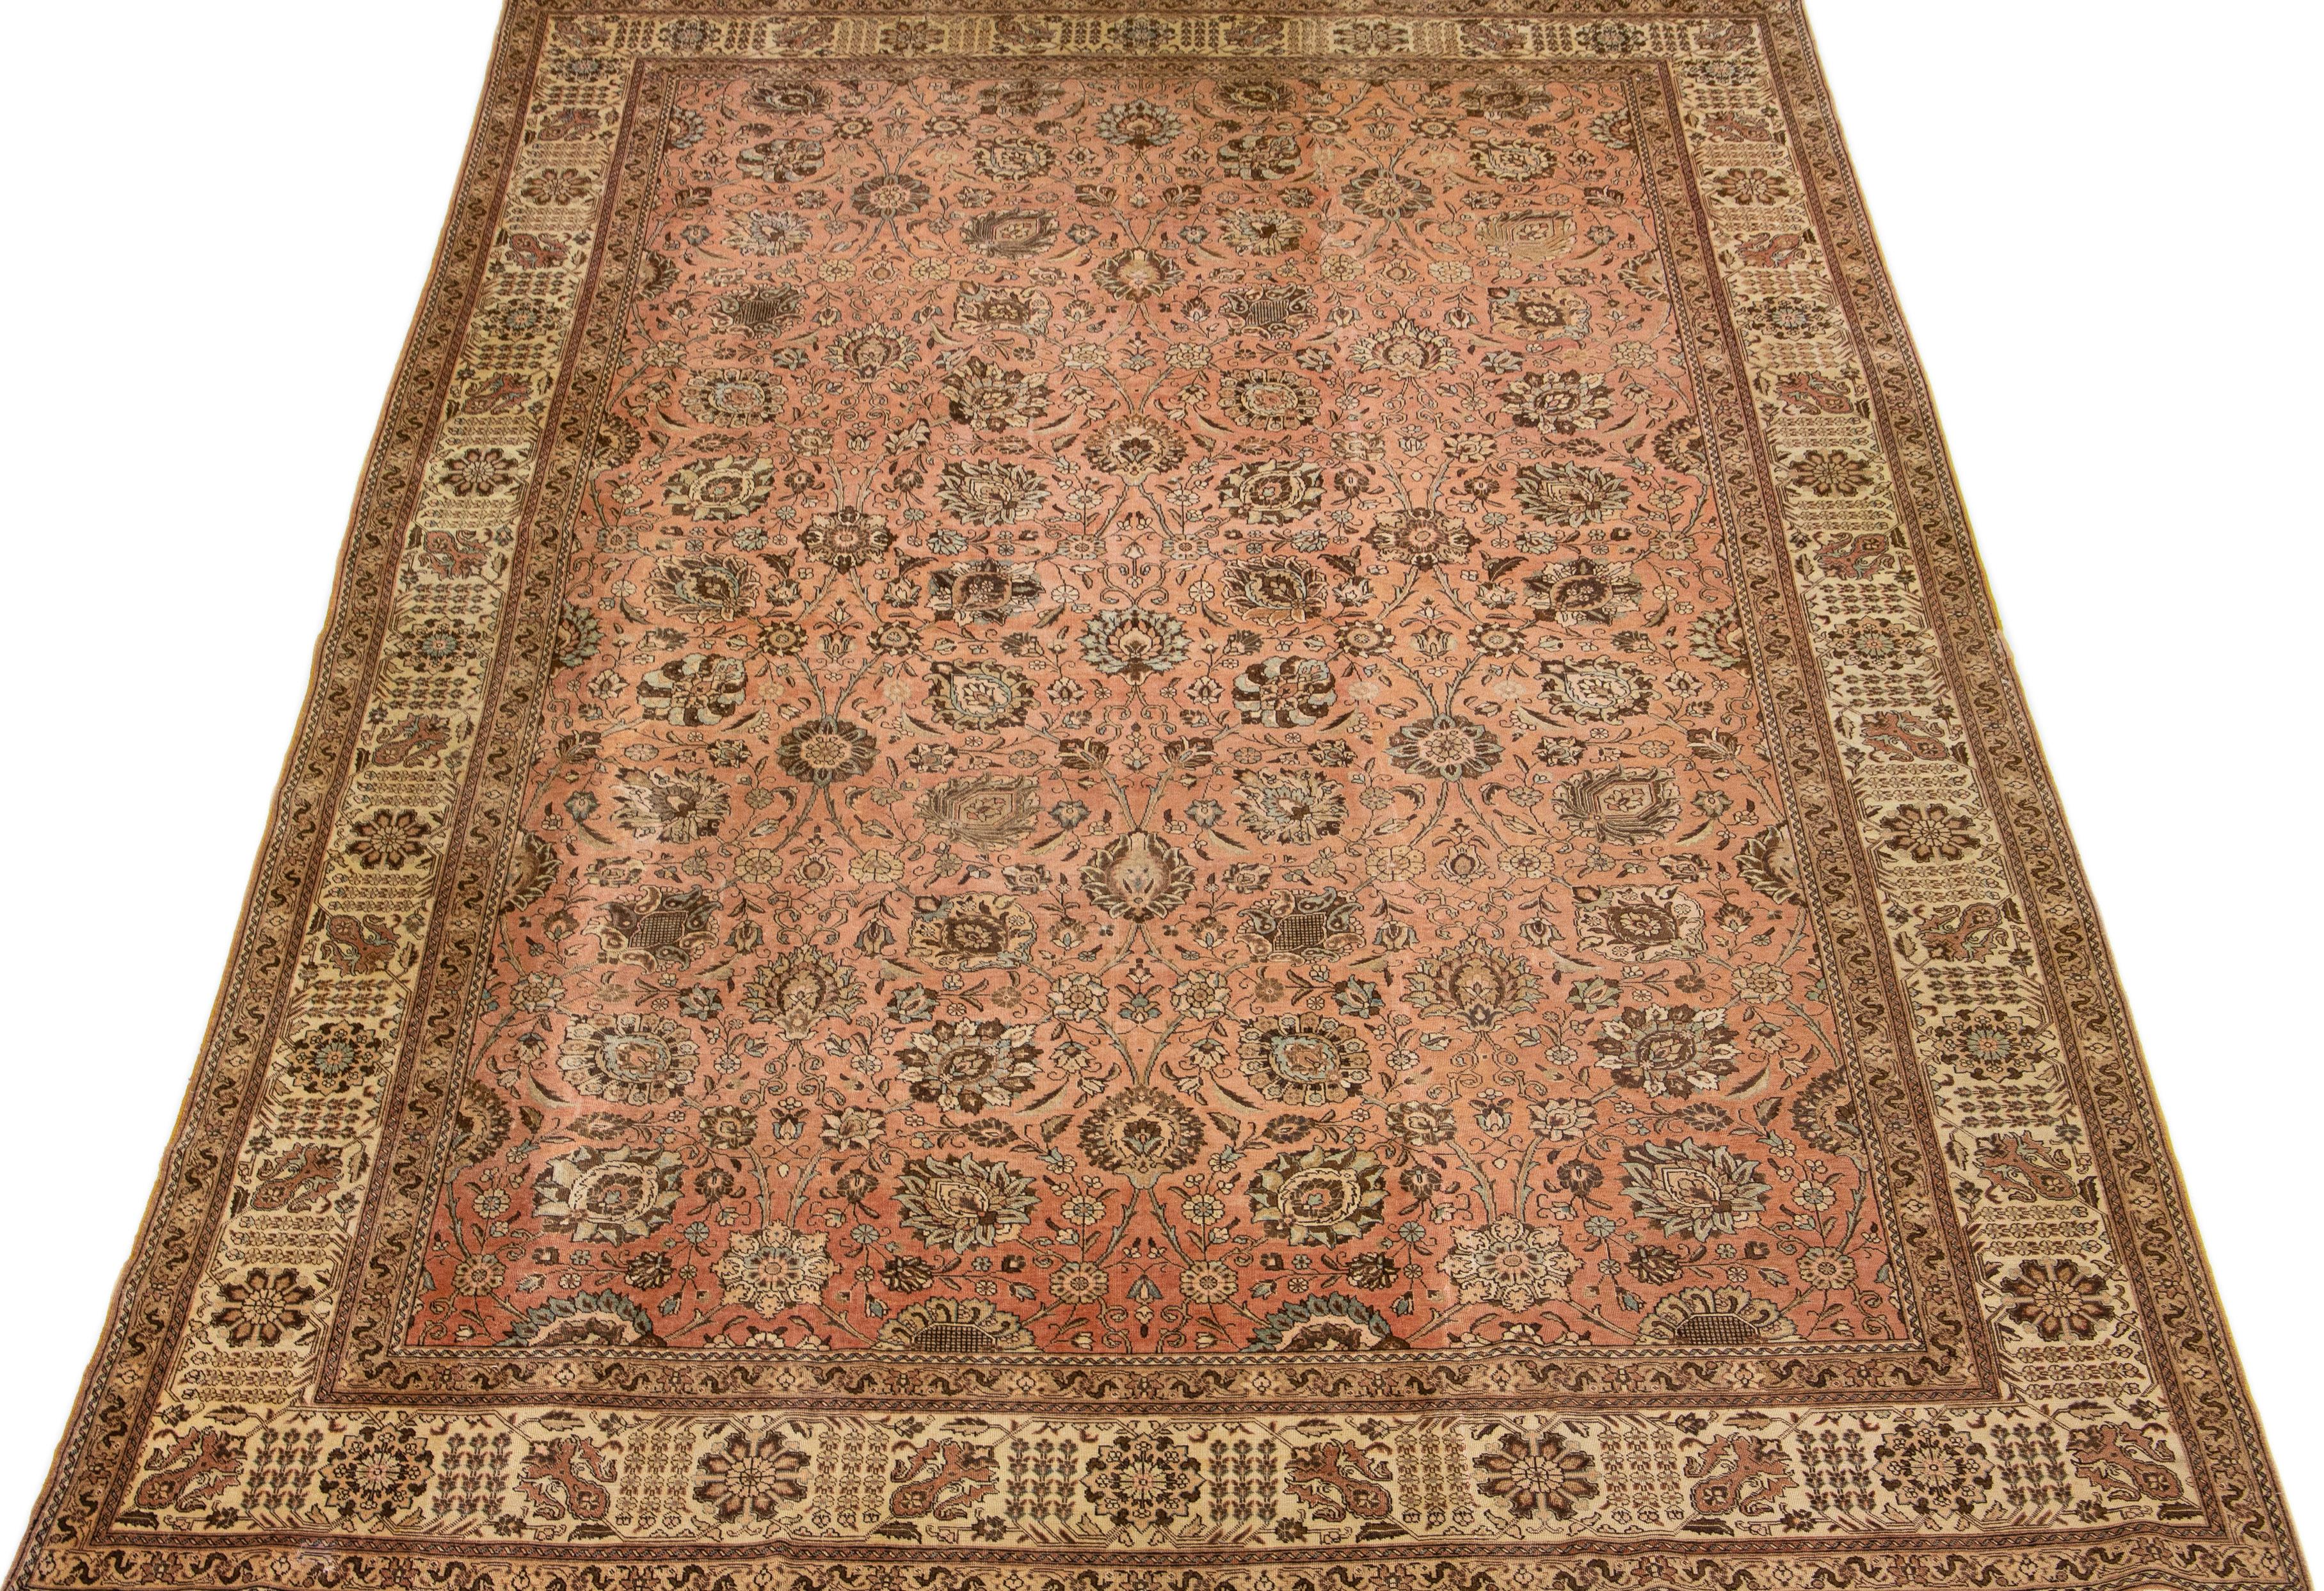 This Persian Tabriz wool rug showcases an exquisite traditional floral medallion design with striking beige, blue, and brown accents against a peach background. 

This rug measures 11'10